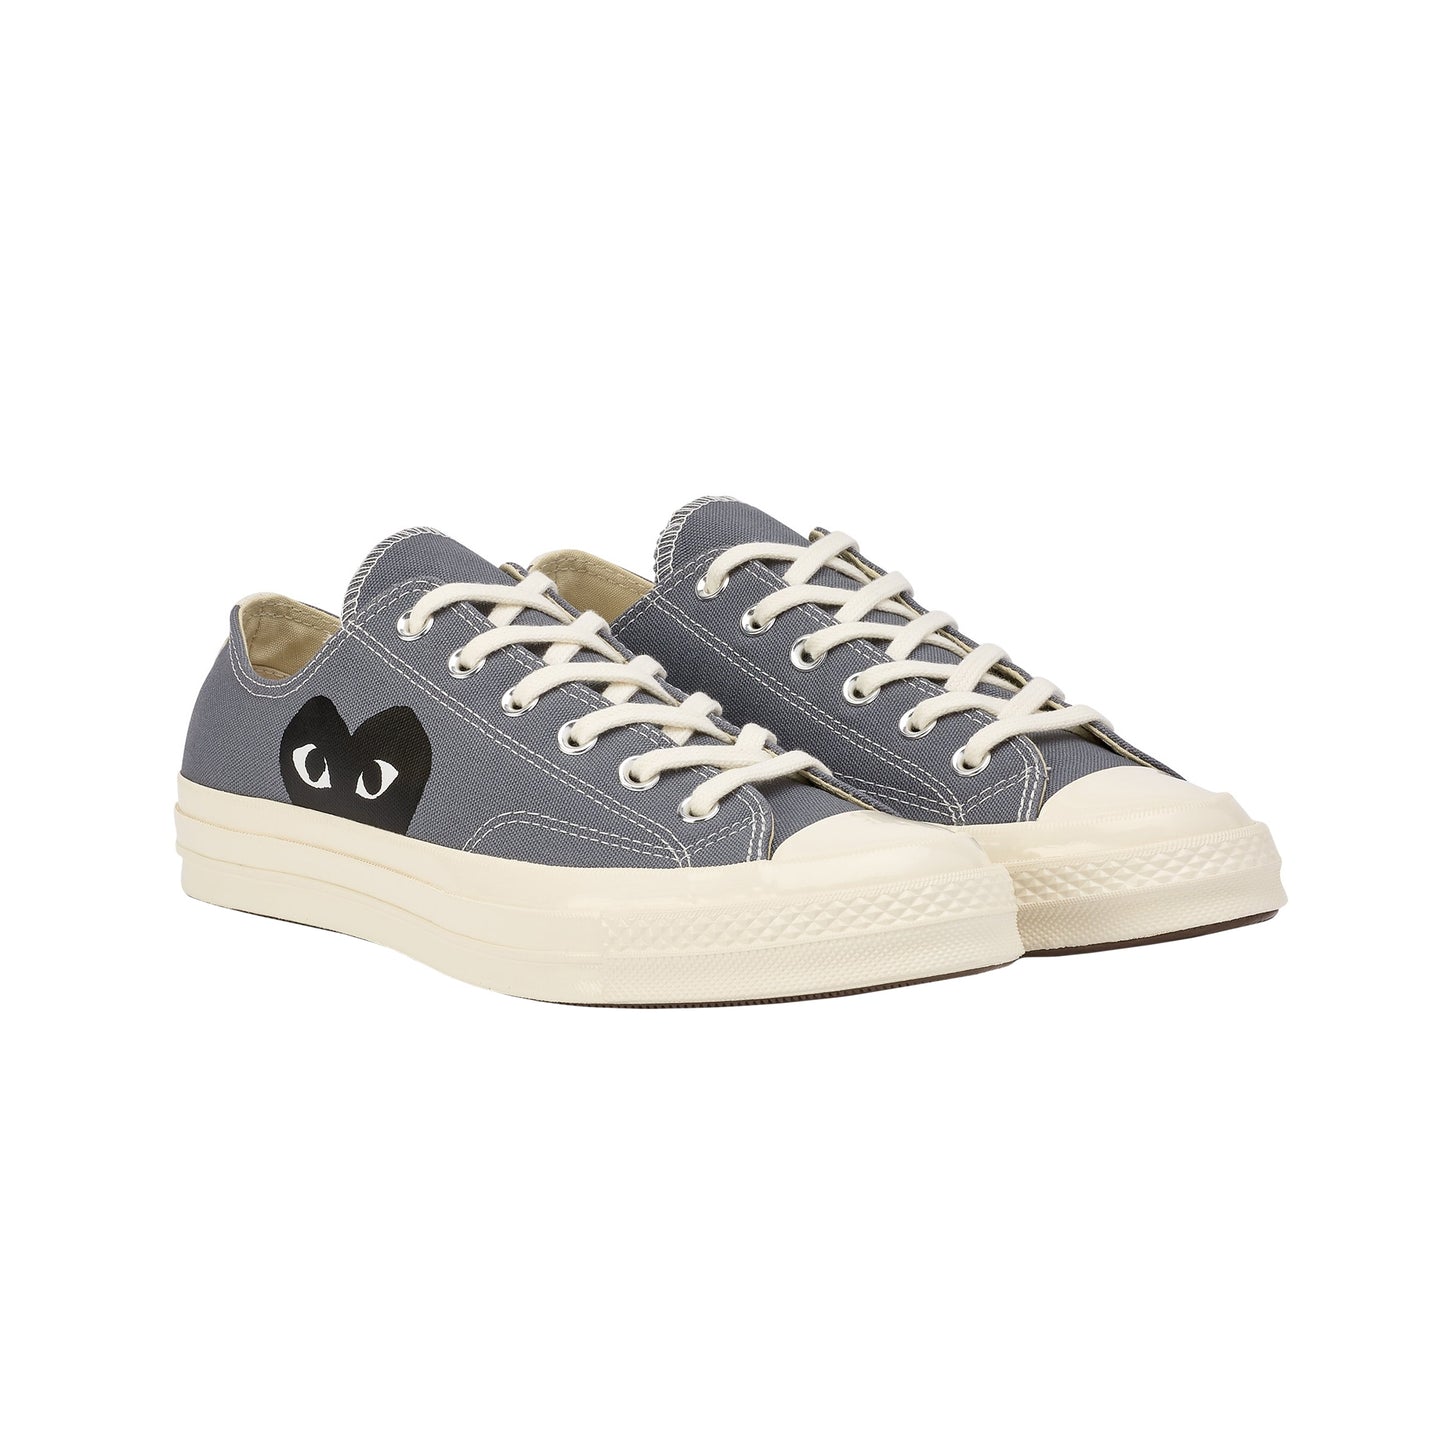 Converse Chuck 70 - Gray low-top sneakers